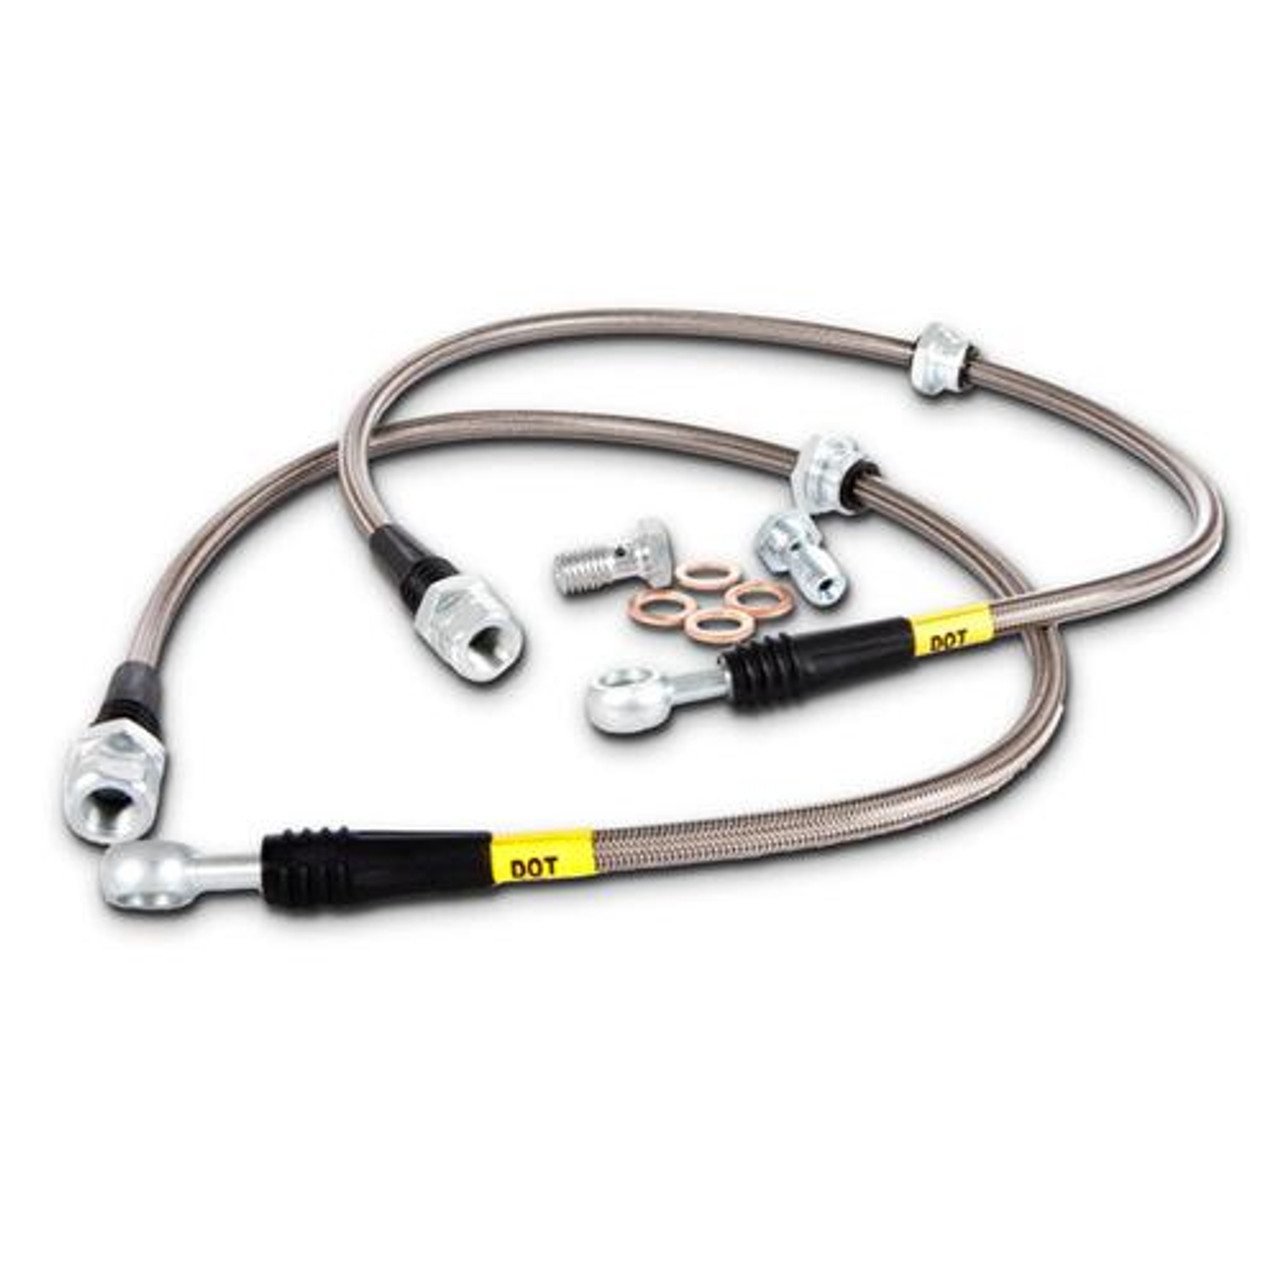 BMW Front Stainless Steel Brake Line Kit - StopTech 950.34013